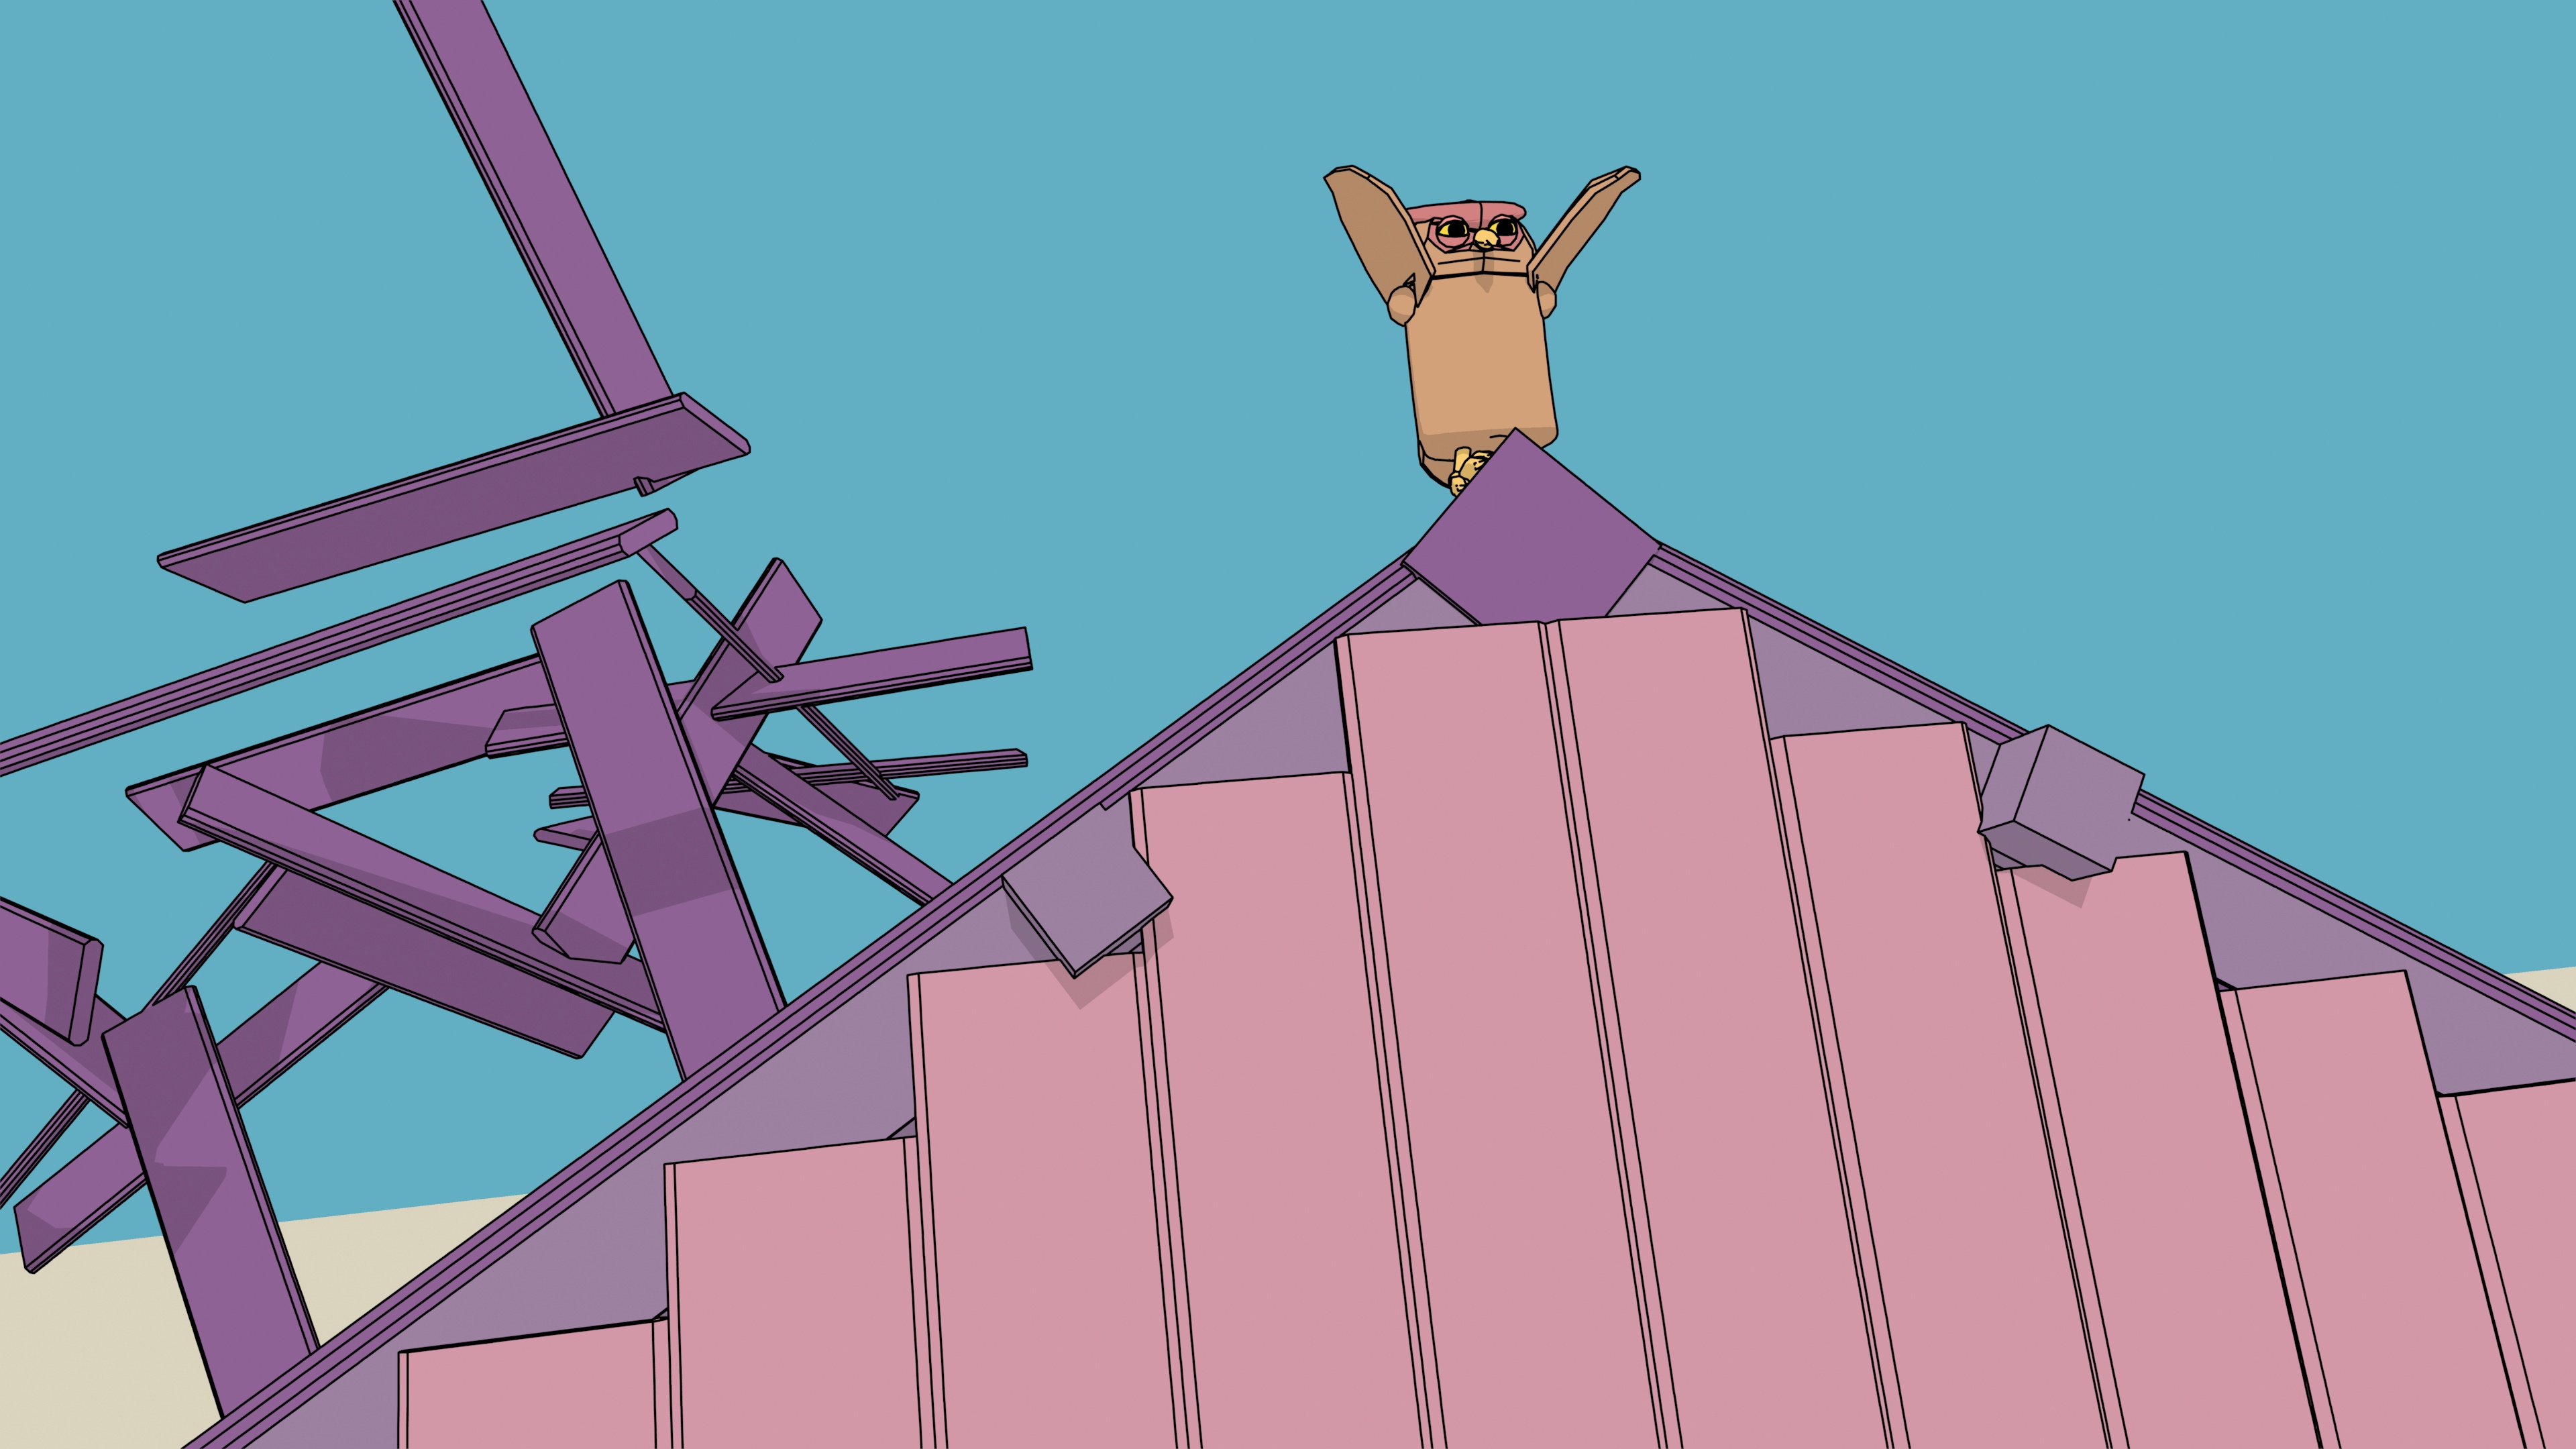 A cartoon horned owl takes flight from a barn roof as an explosion in the barn sends the roof planks into the air.